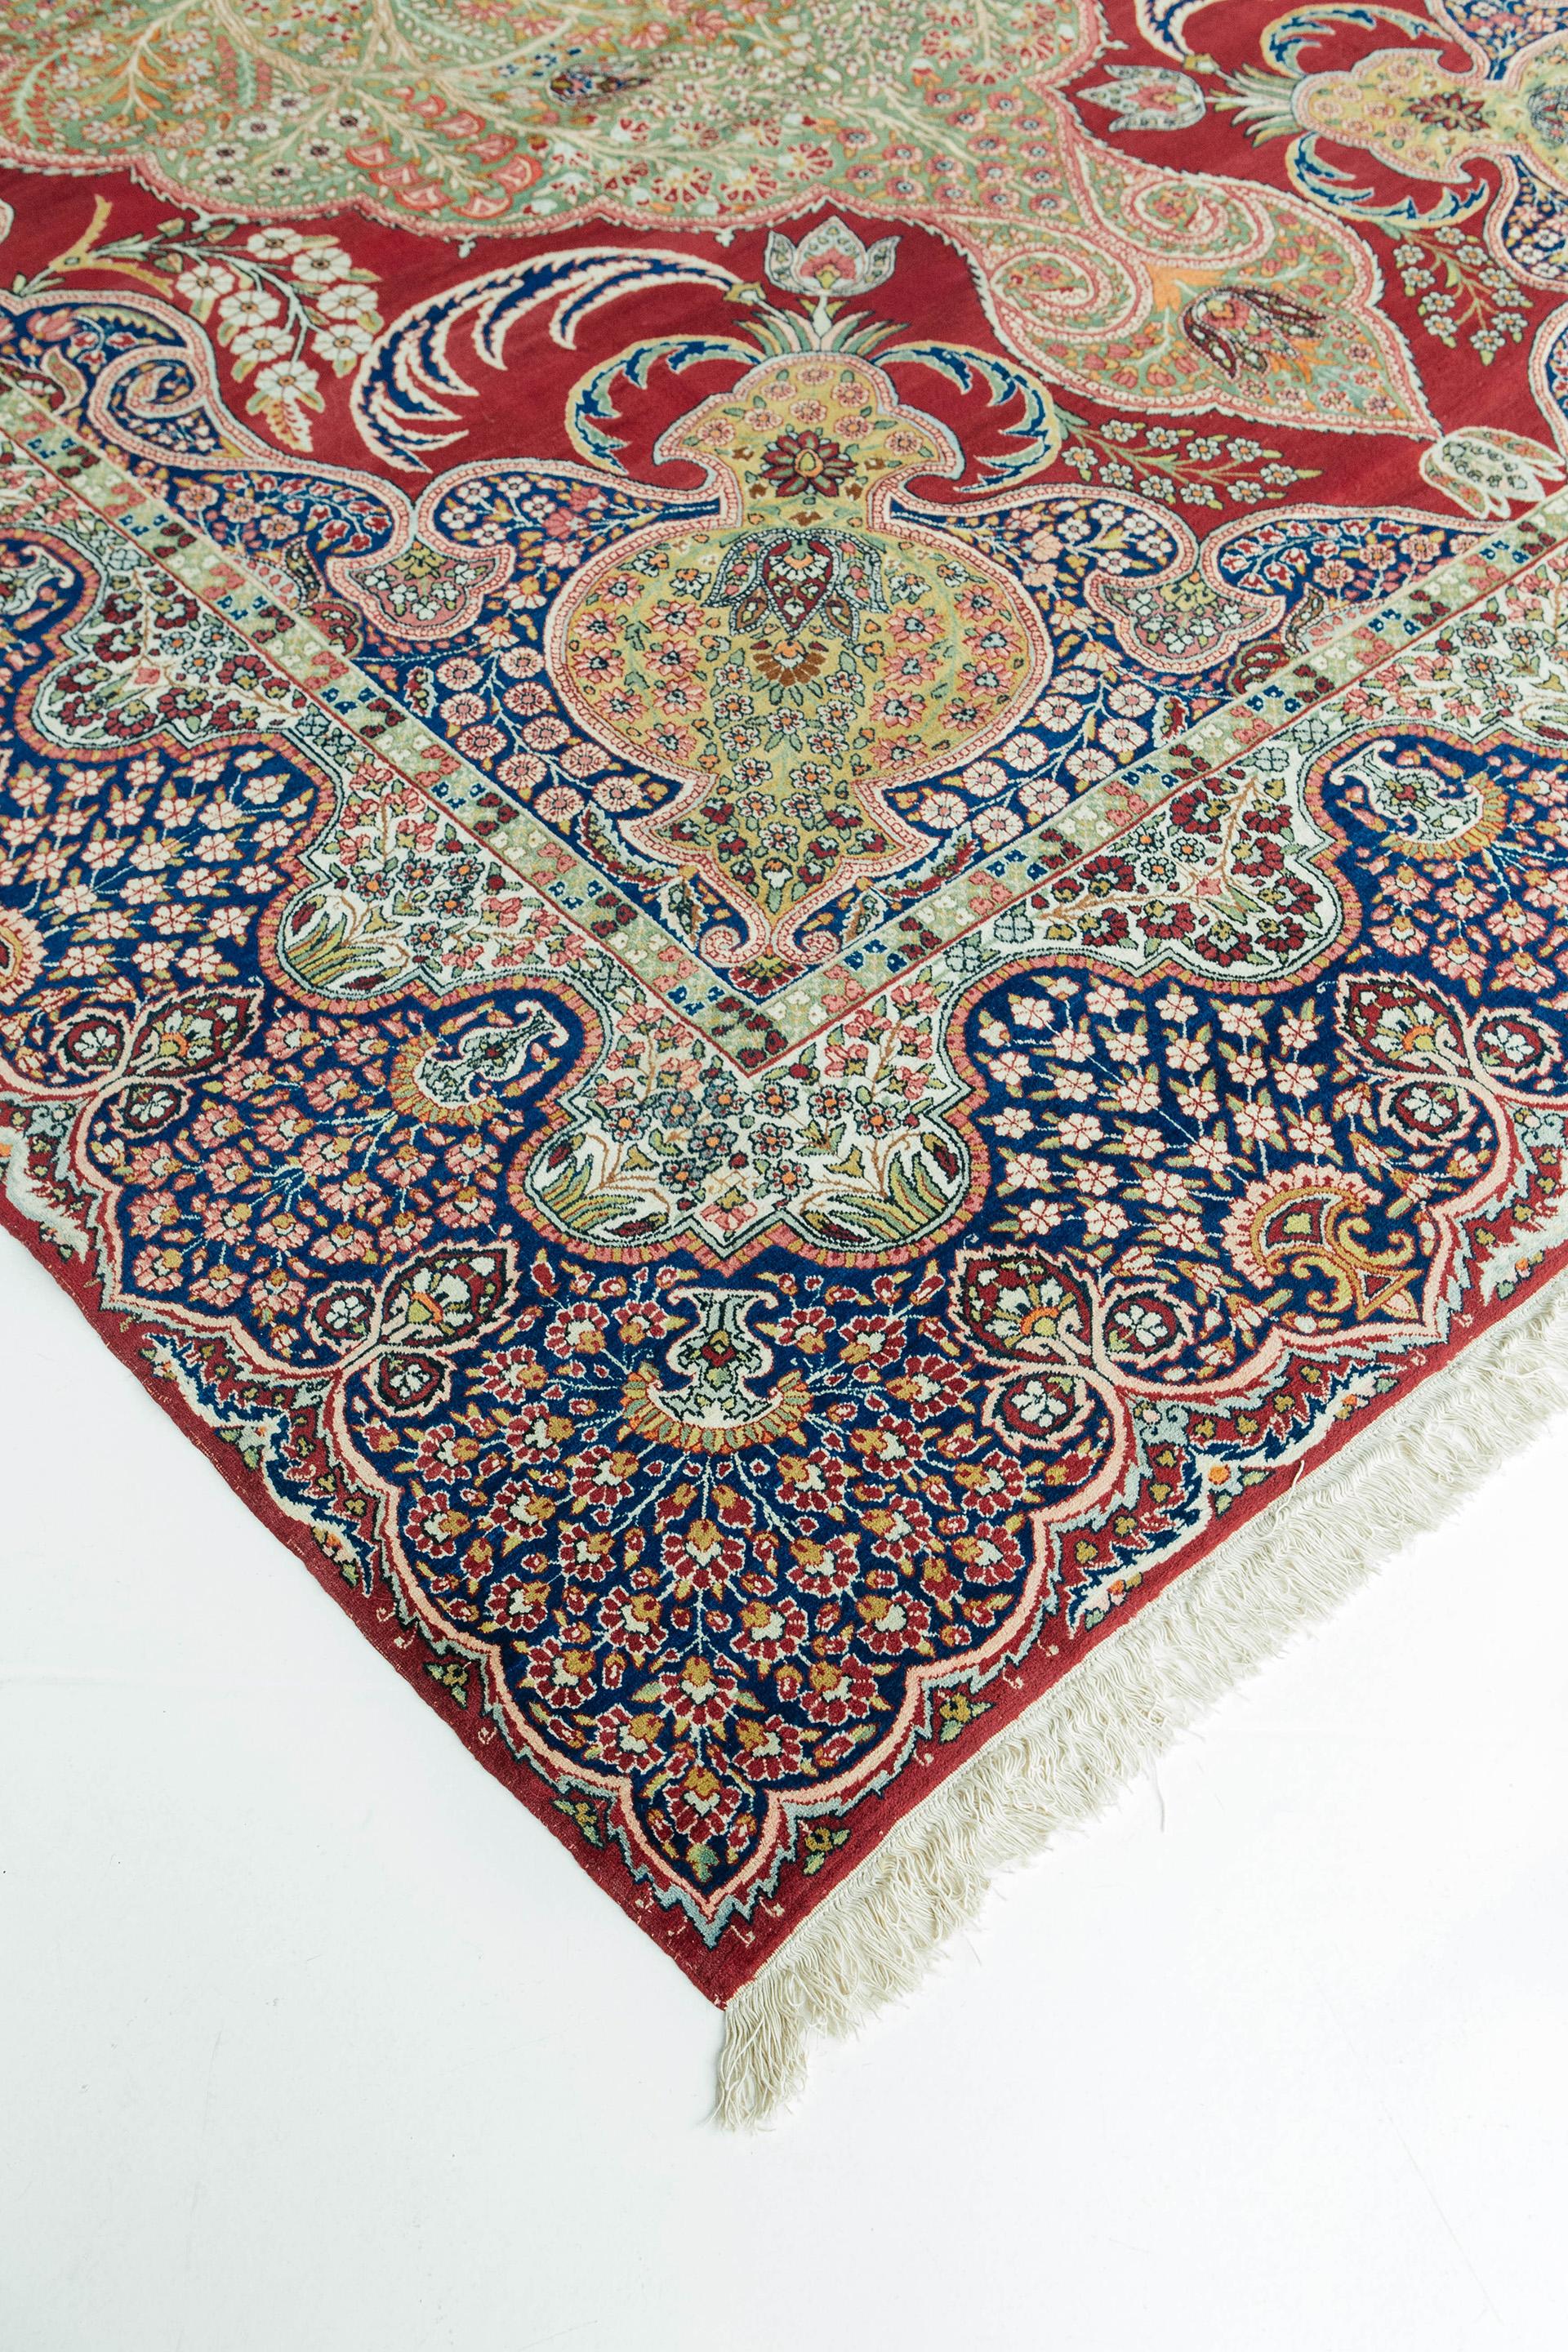 Hand-Knotted Antique Persian Lavar Kerman Rug